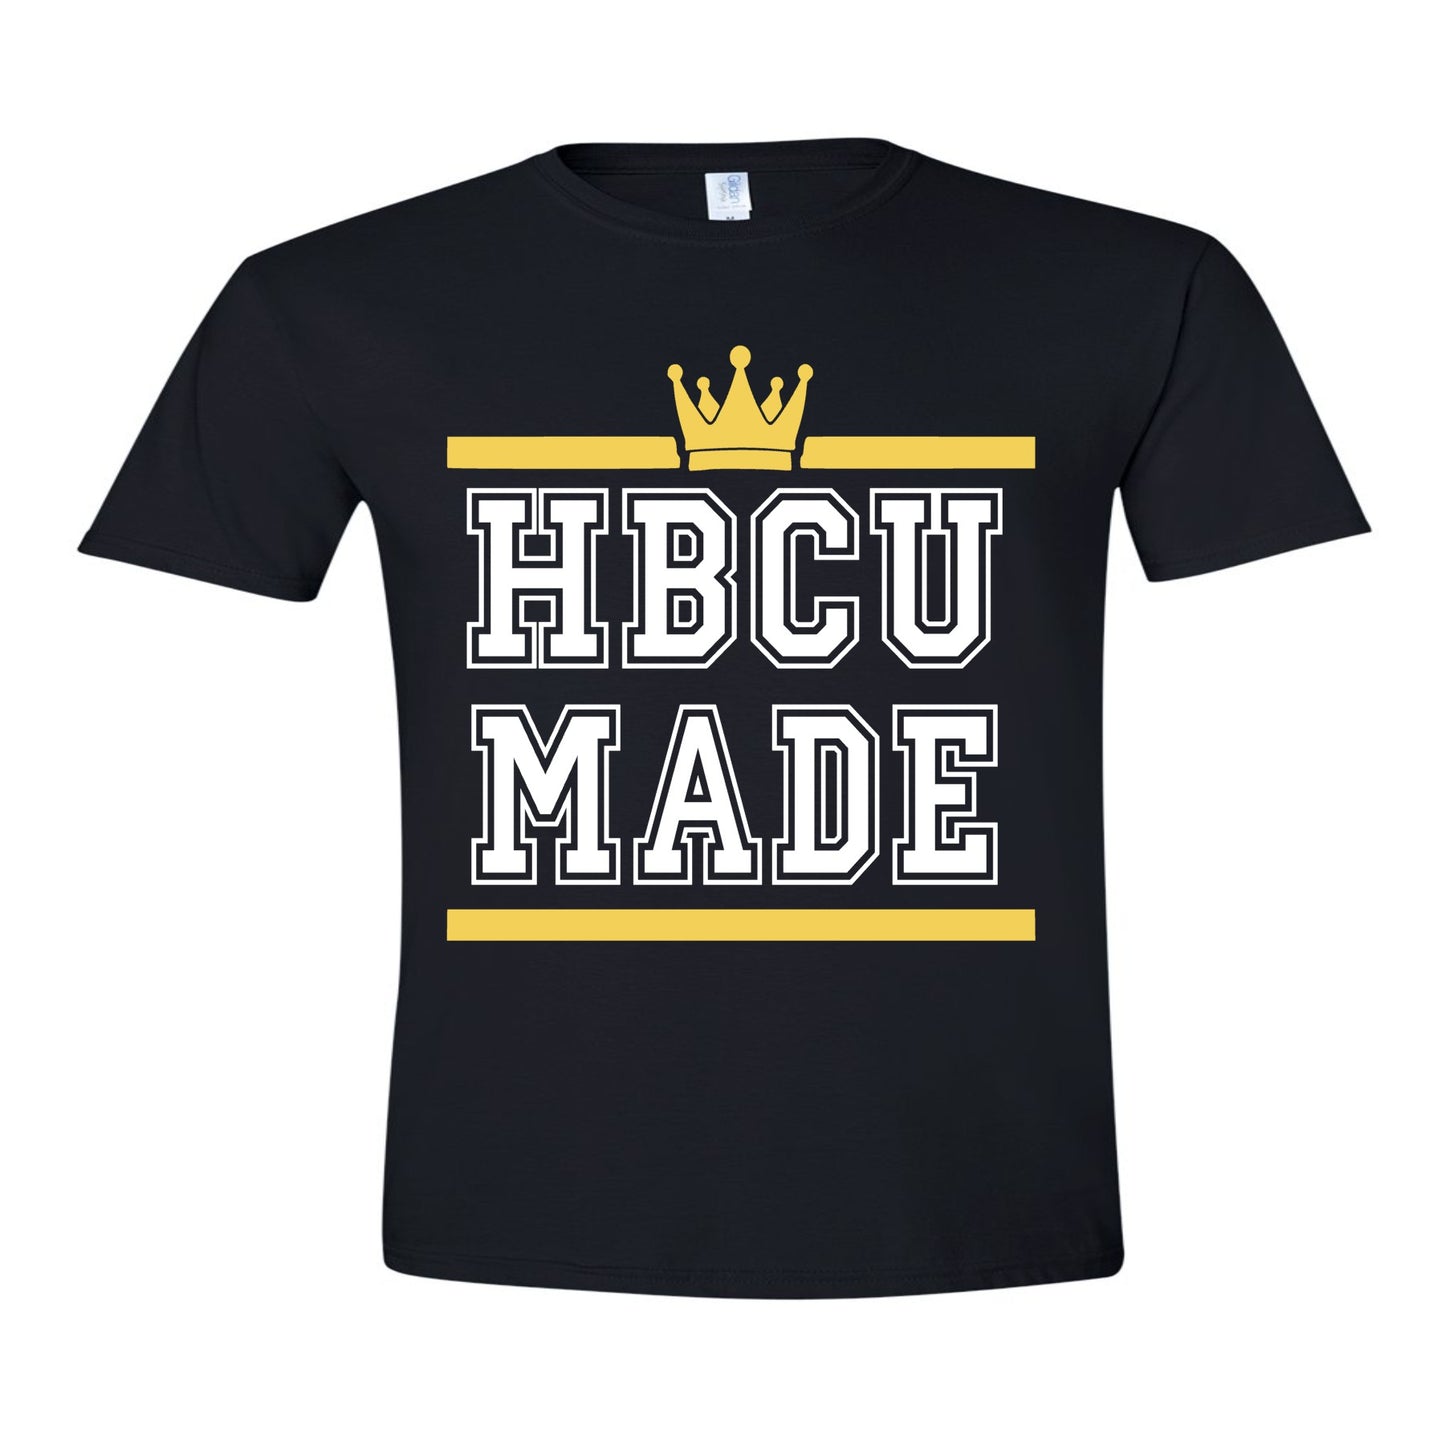 HBCU MADE TSHIRT.  Message us for additional colors or customizations. Contact us form at the bottom of the website